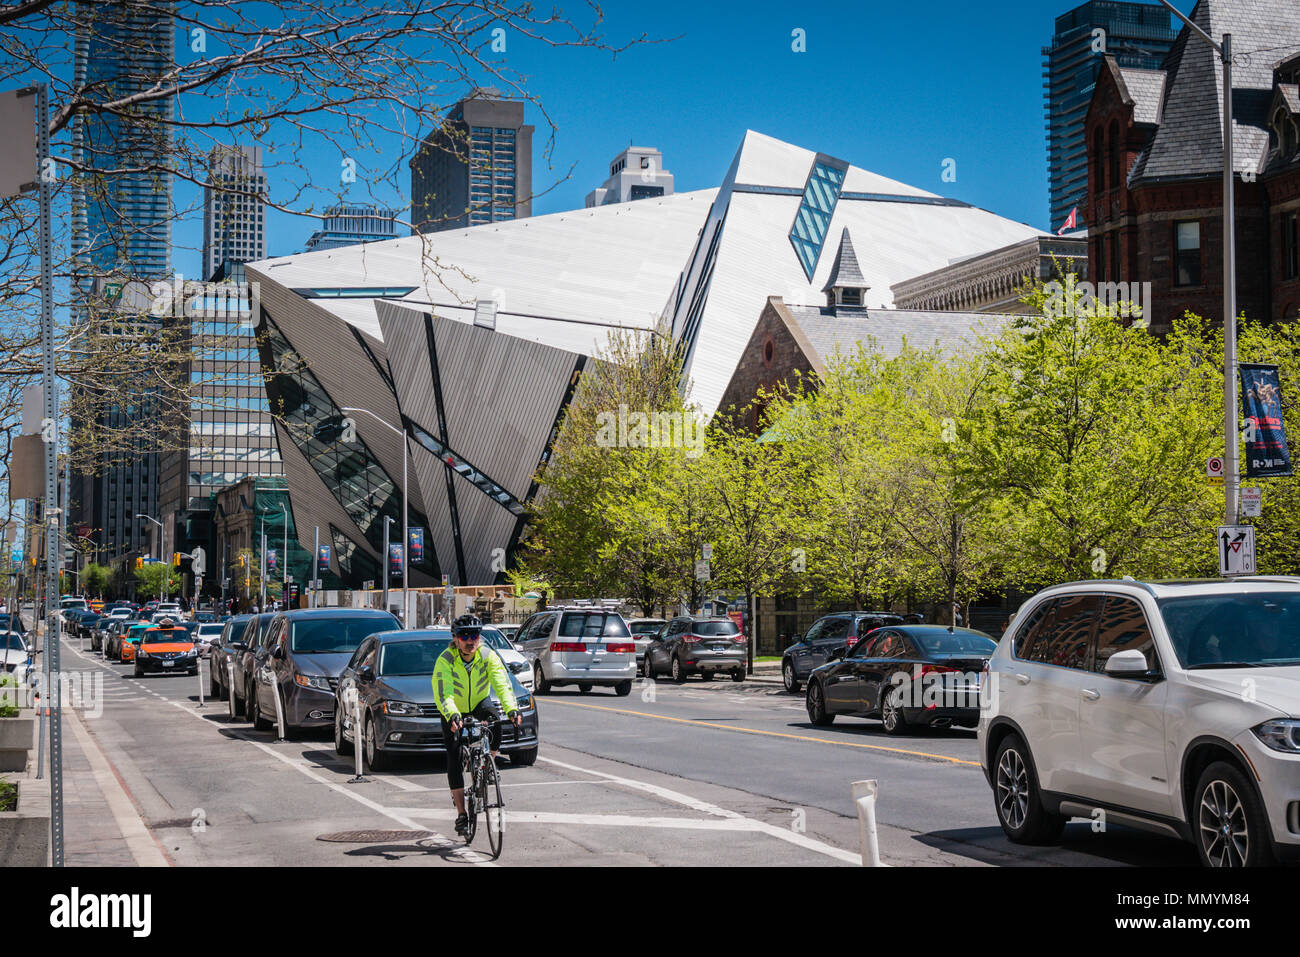 Outside view of the Royal Ontario Museum on Bloor Street in Toronto Canada on a sunny day Stock Photo